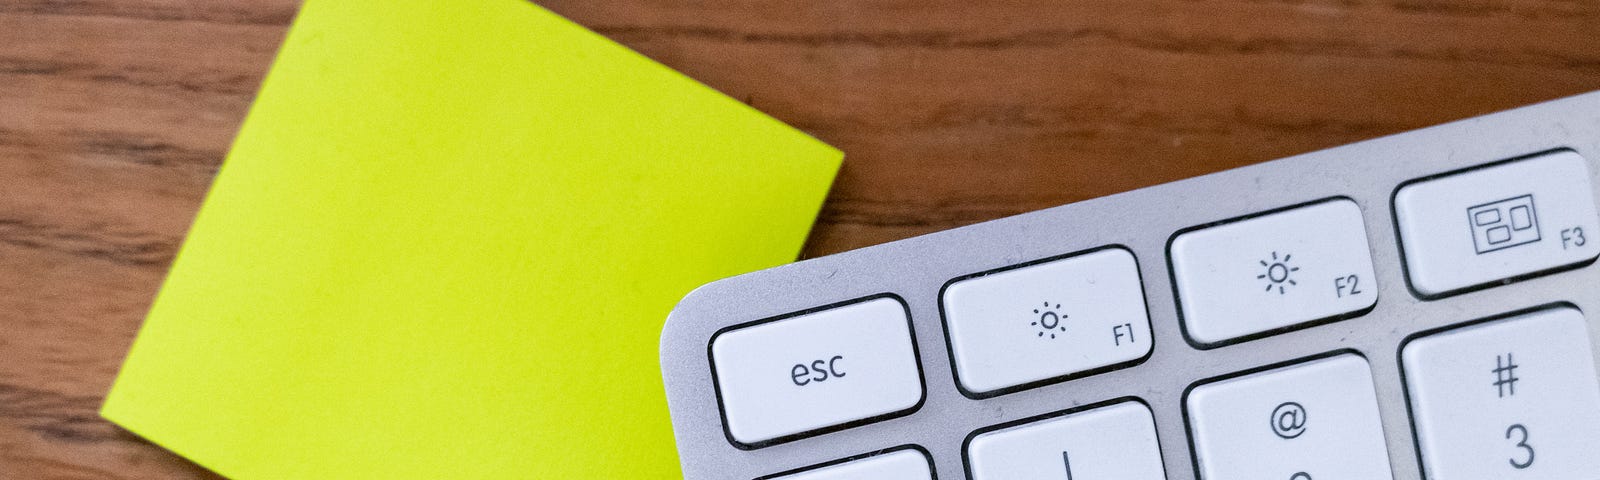 Photo of a computer keyboard with the tab and escape buttons in focus. The keyboard is overlapping a blank post-it note.